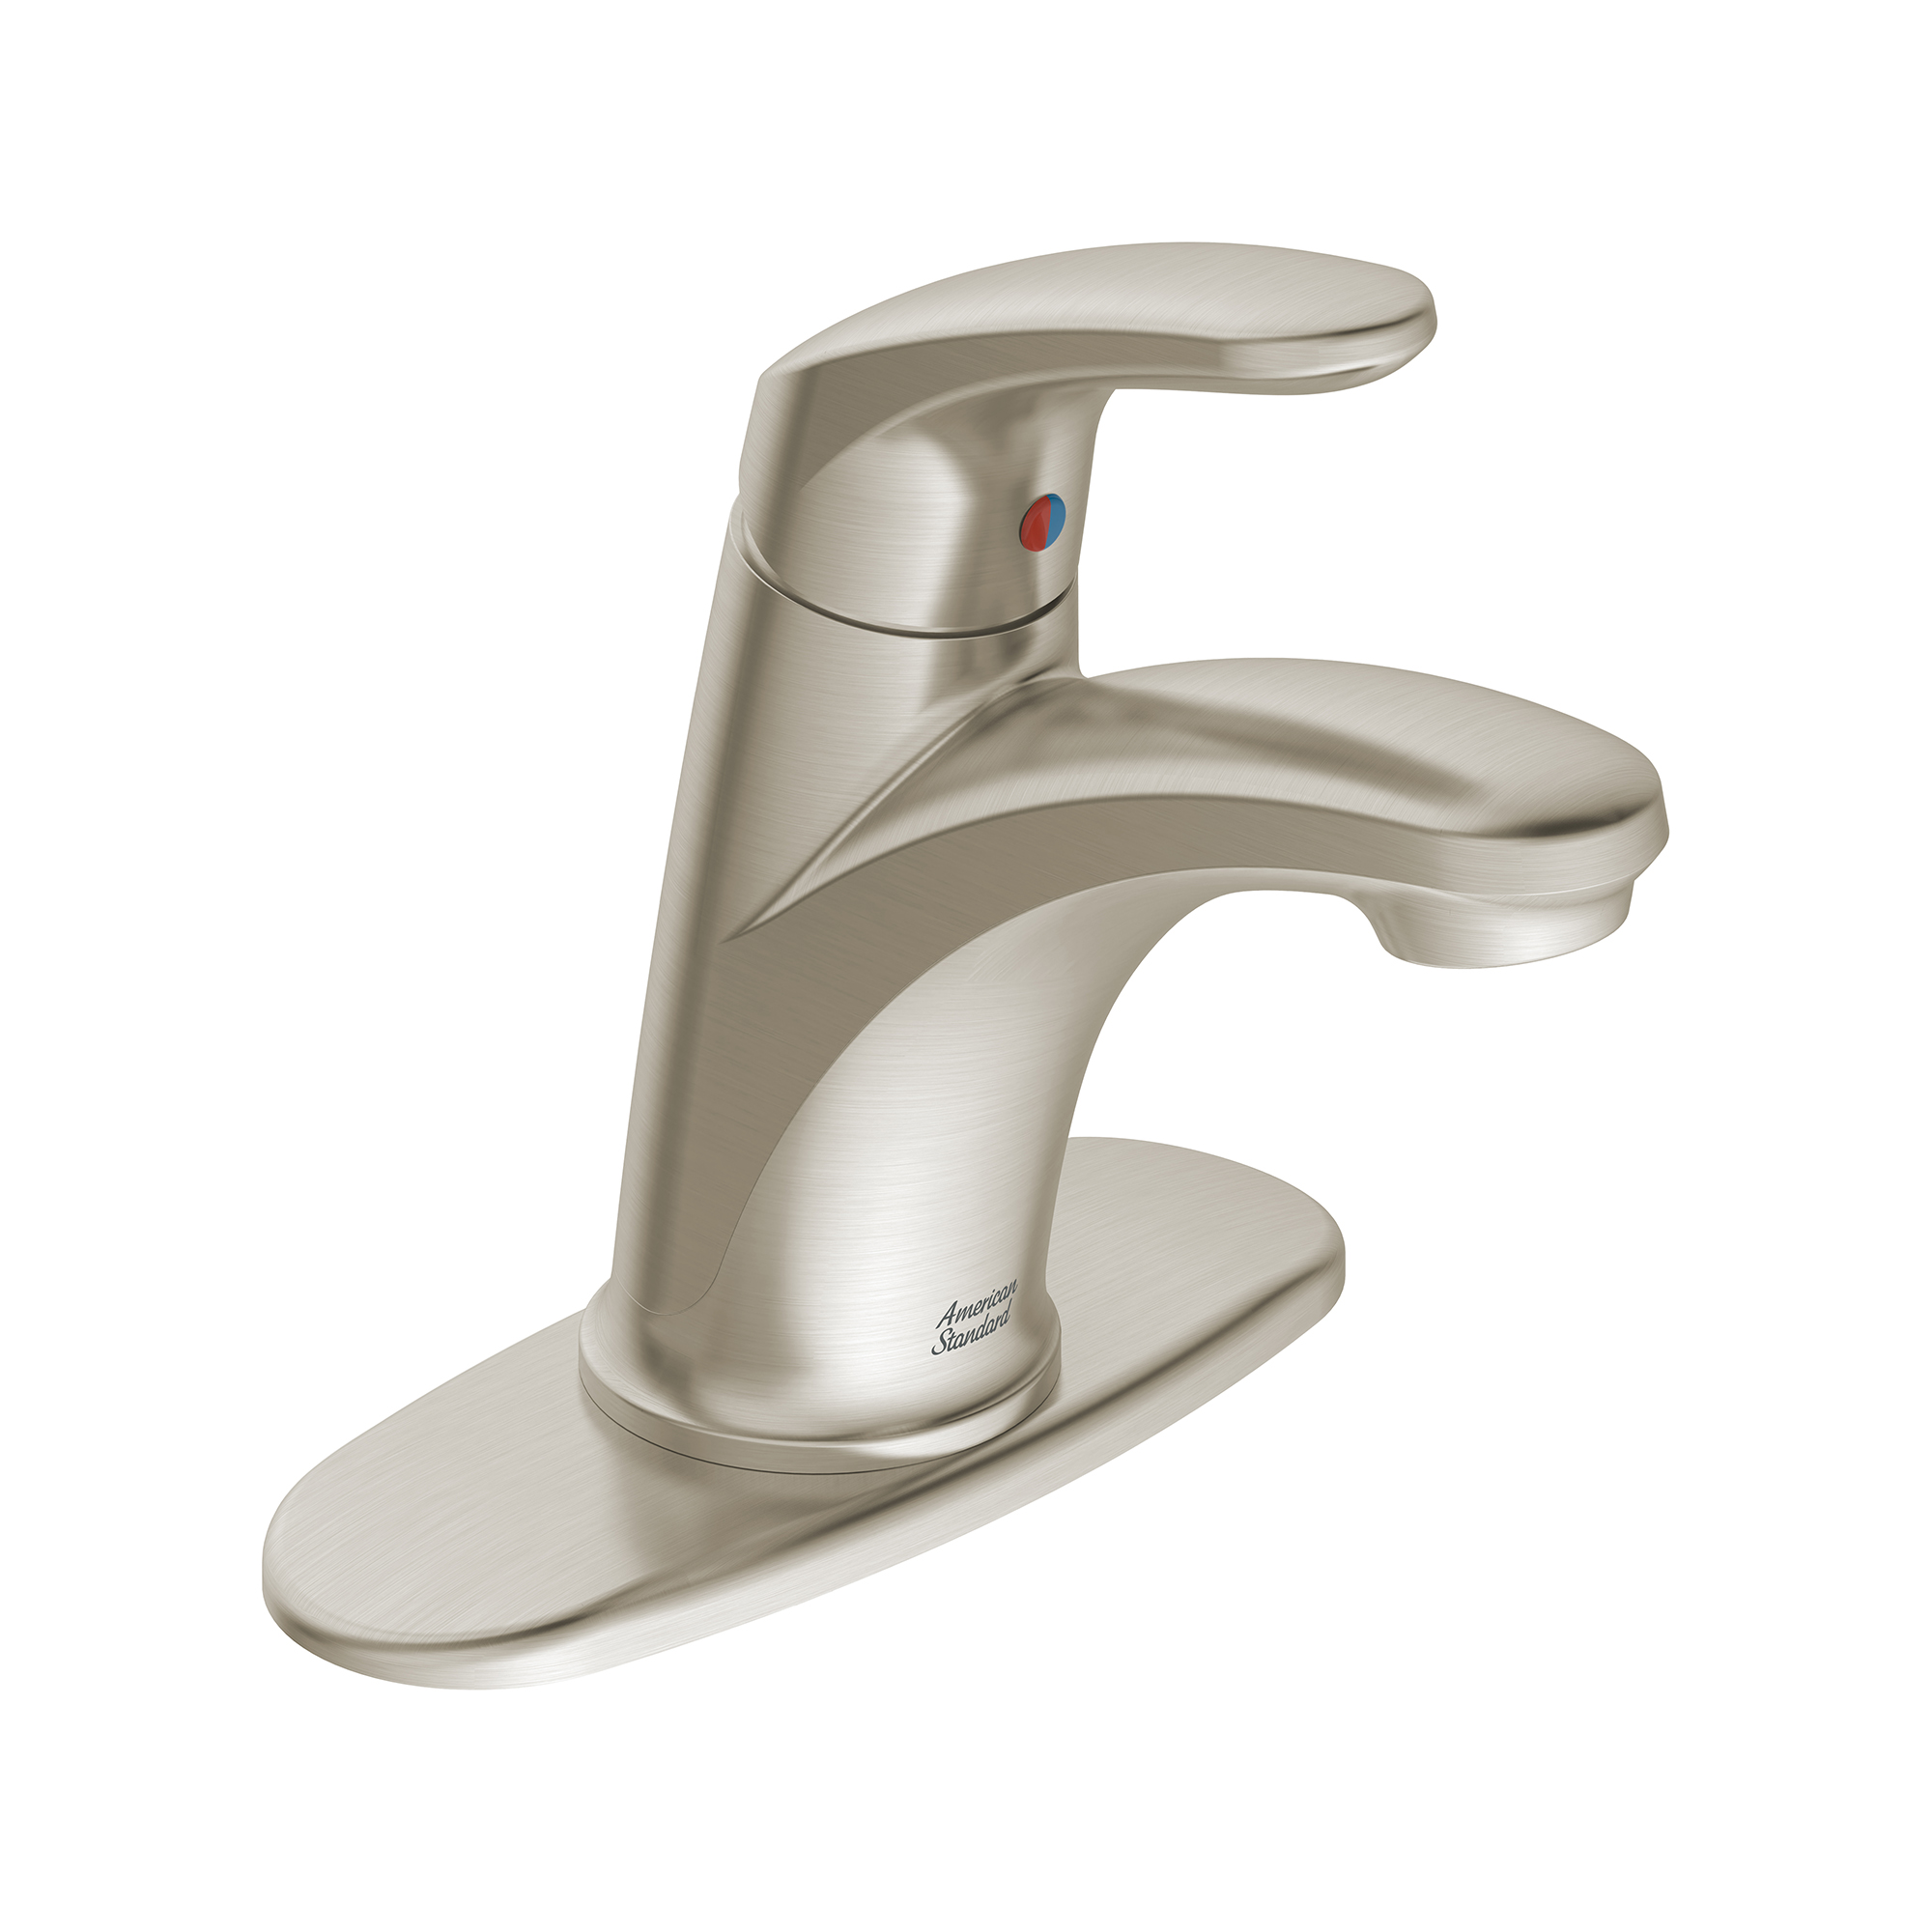 Colony® PRO Single Hole Single-Handle Bathroom Faucet 1.2 gpm/4.5 L/min With Lever Handle